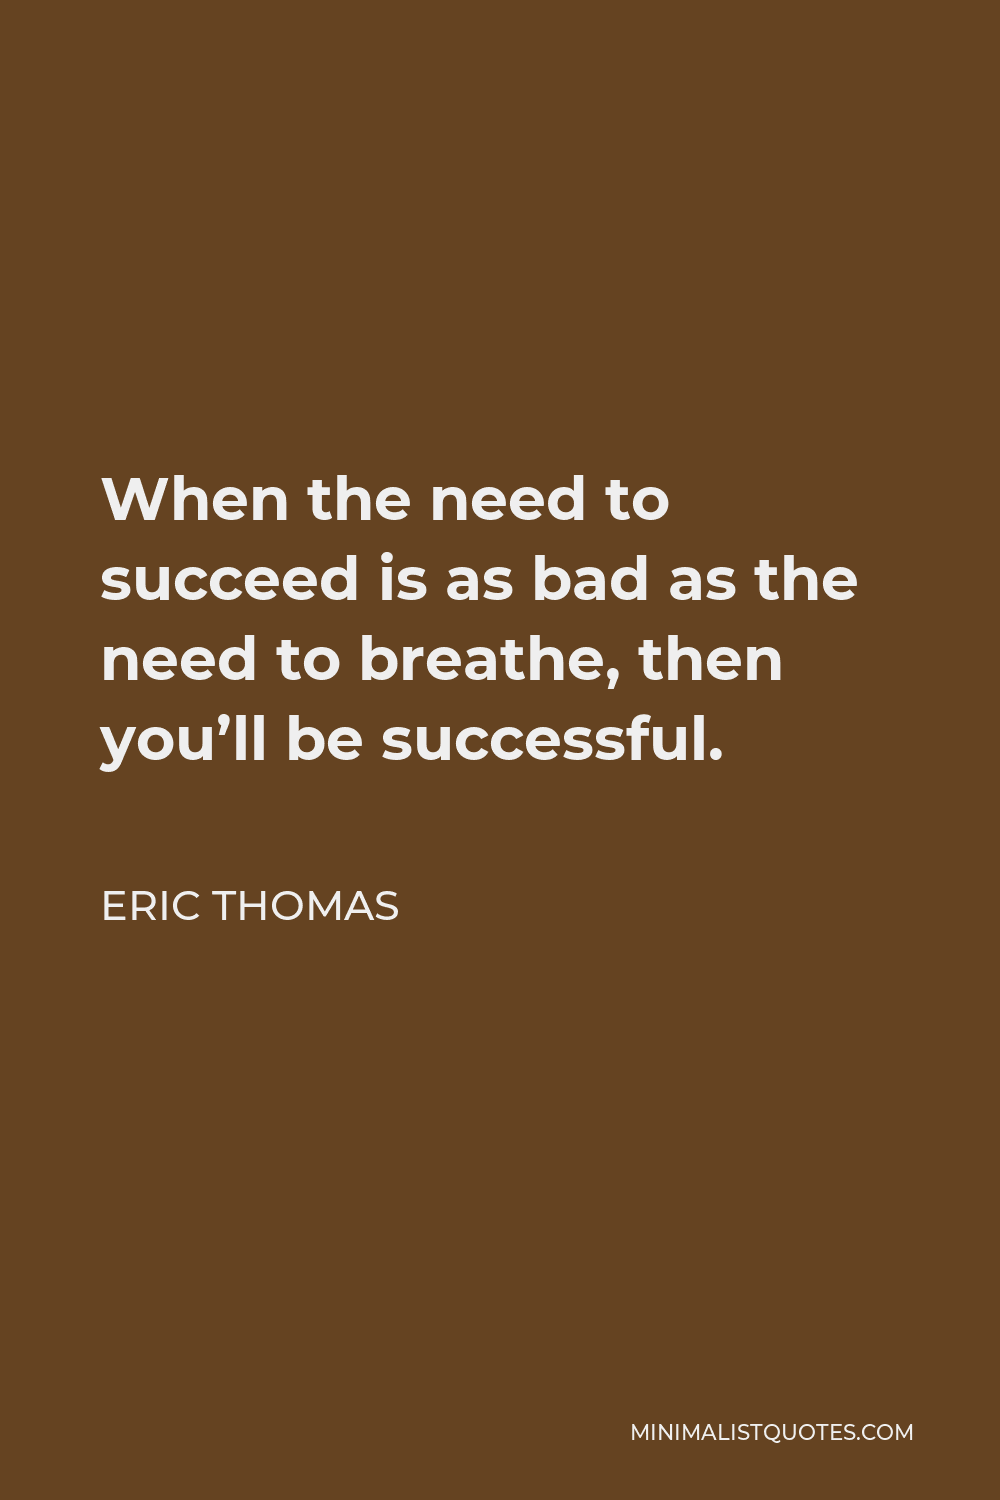 Eric Thomas Quote - When the need to succeed is as bad as the need to breathe, then you’ll be successful.